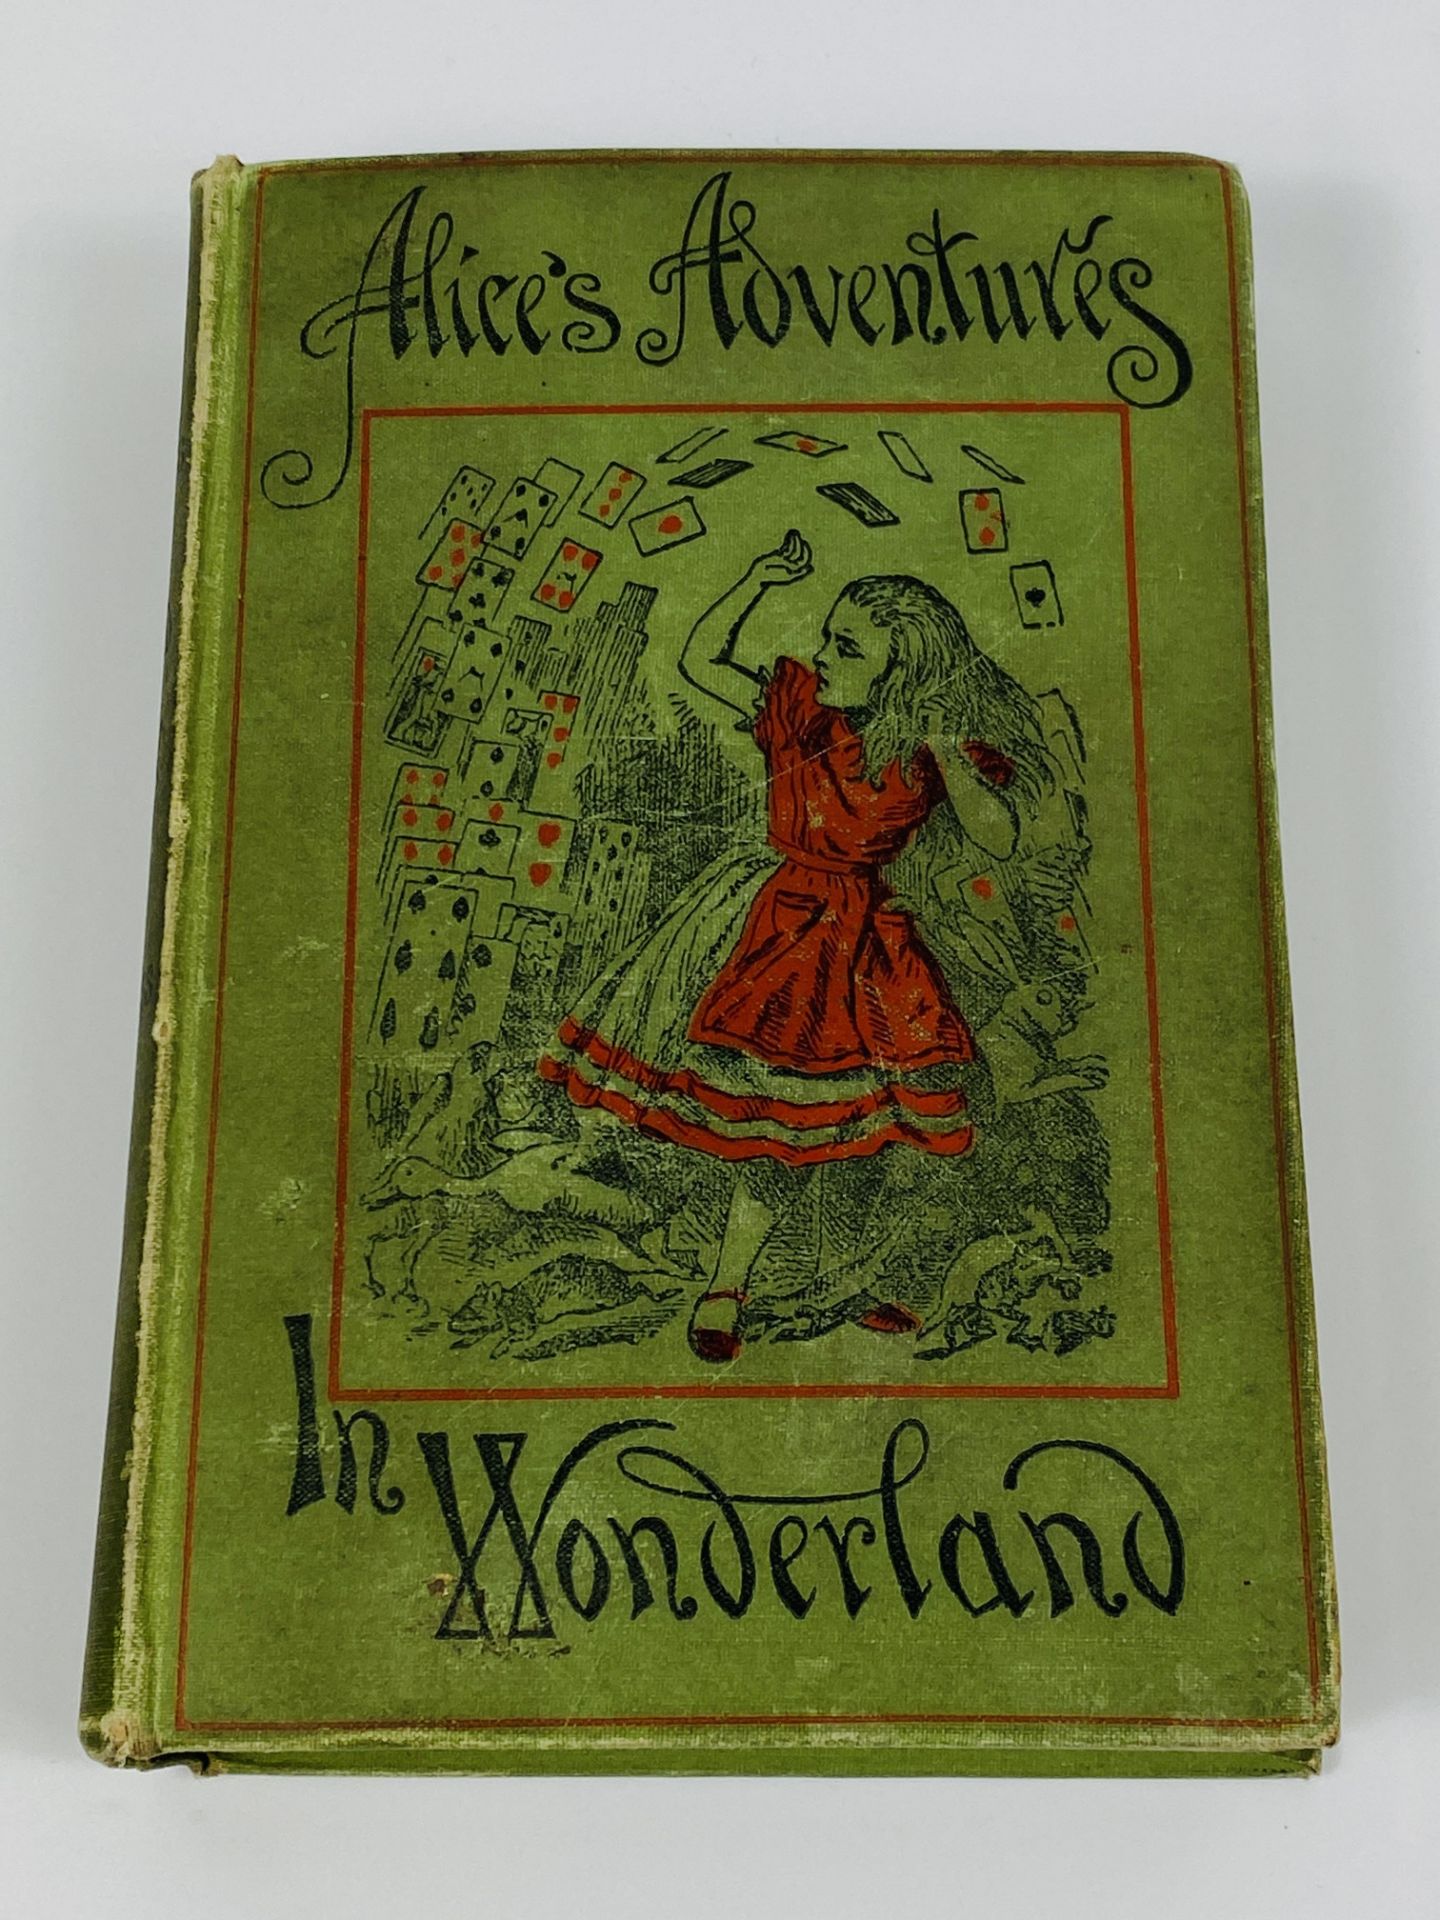 Alice's Adventures in Wonderland, Lewis Carroll, published MacMillan and Co, 1898